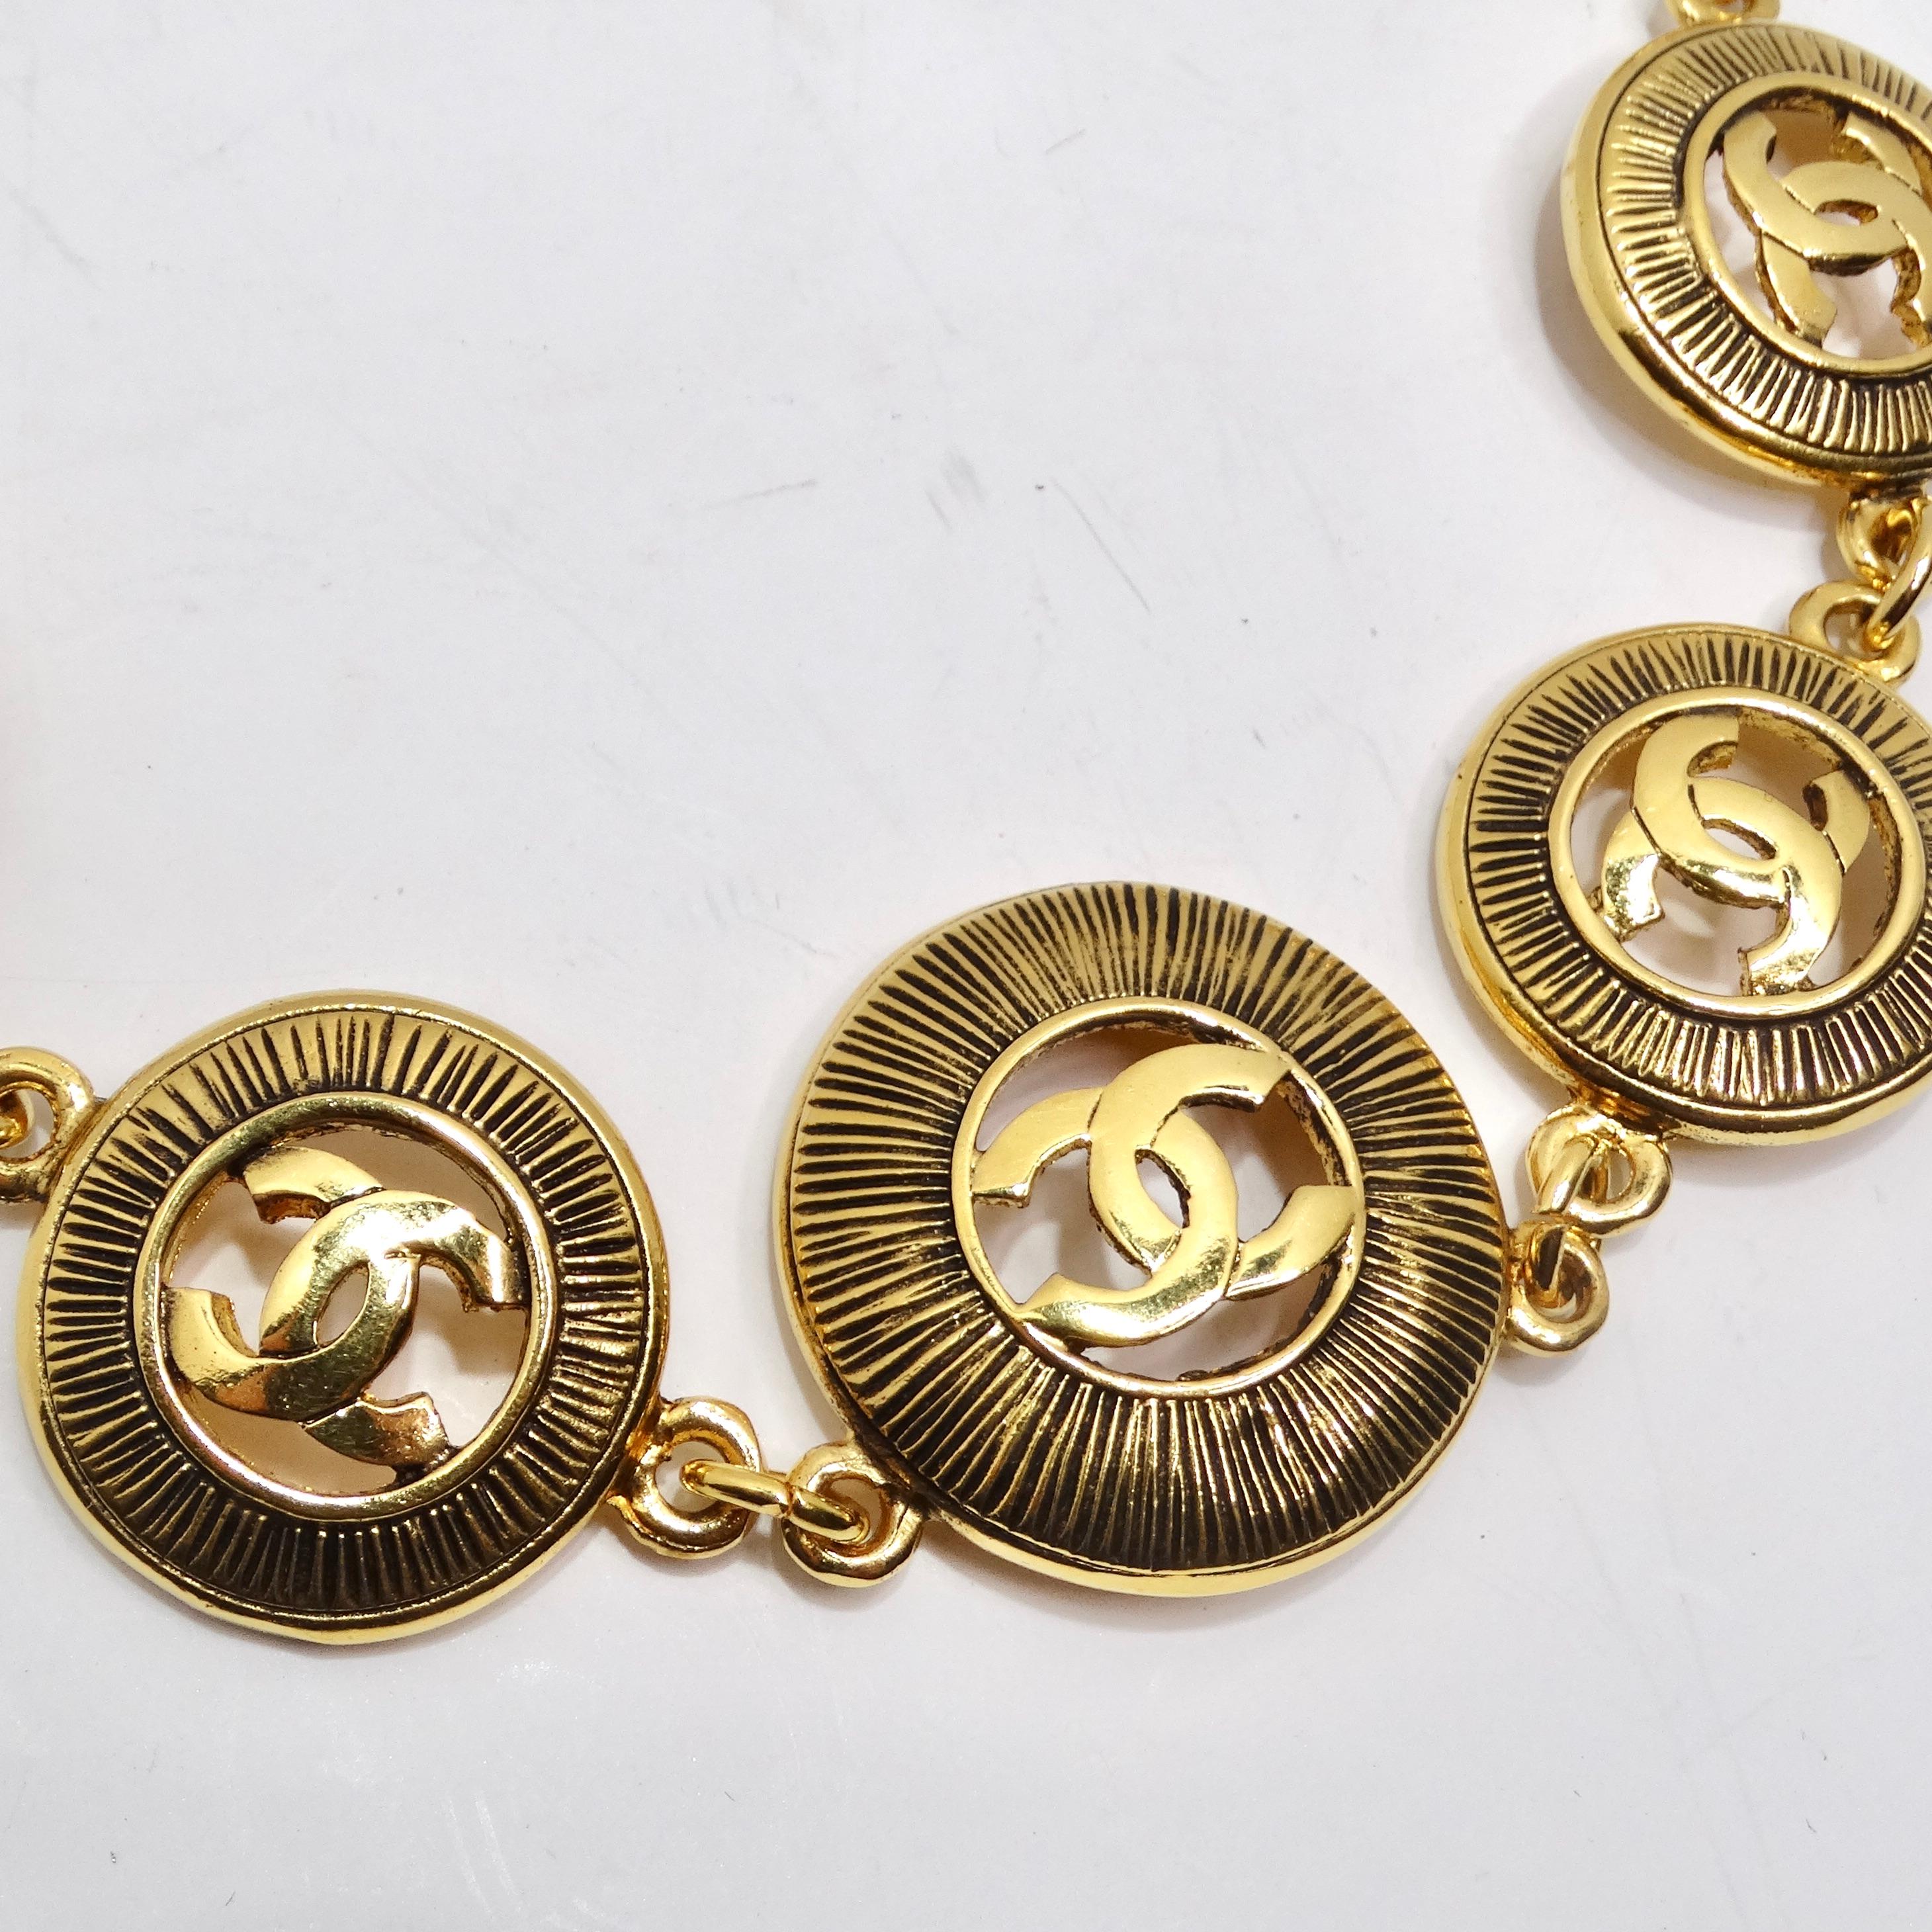 Chanel 1980s Logo Medallion Necklace In Excellent Condition For Sale In Scottsdale, AZ